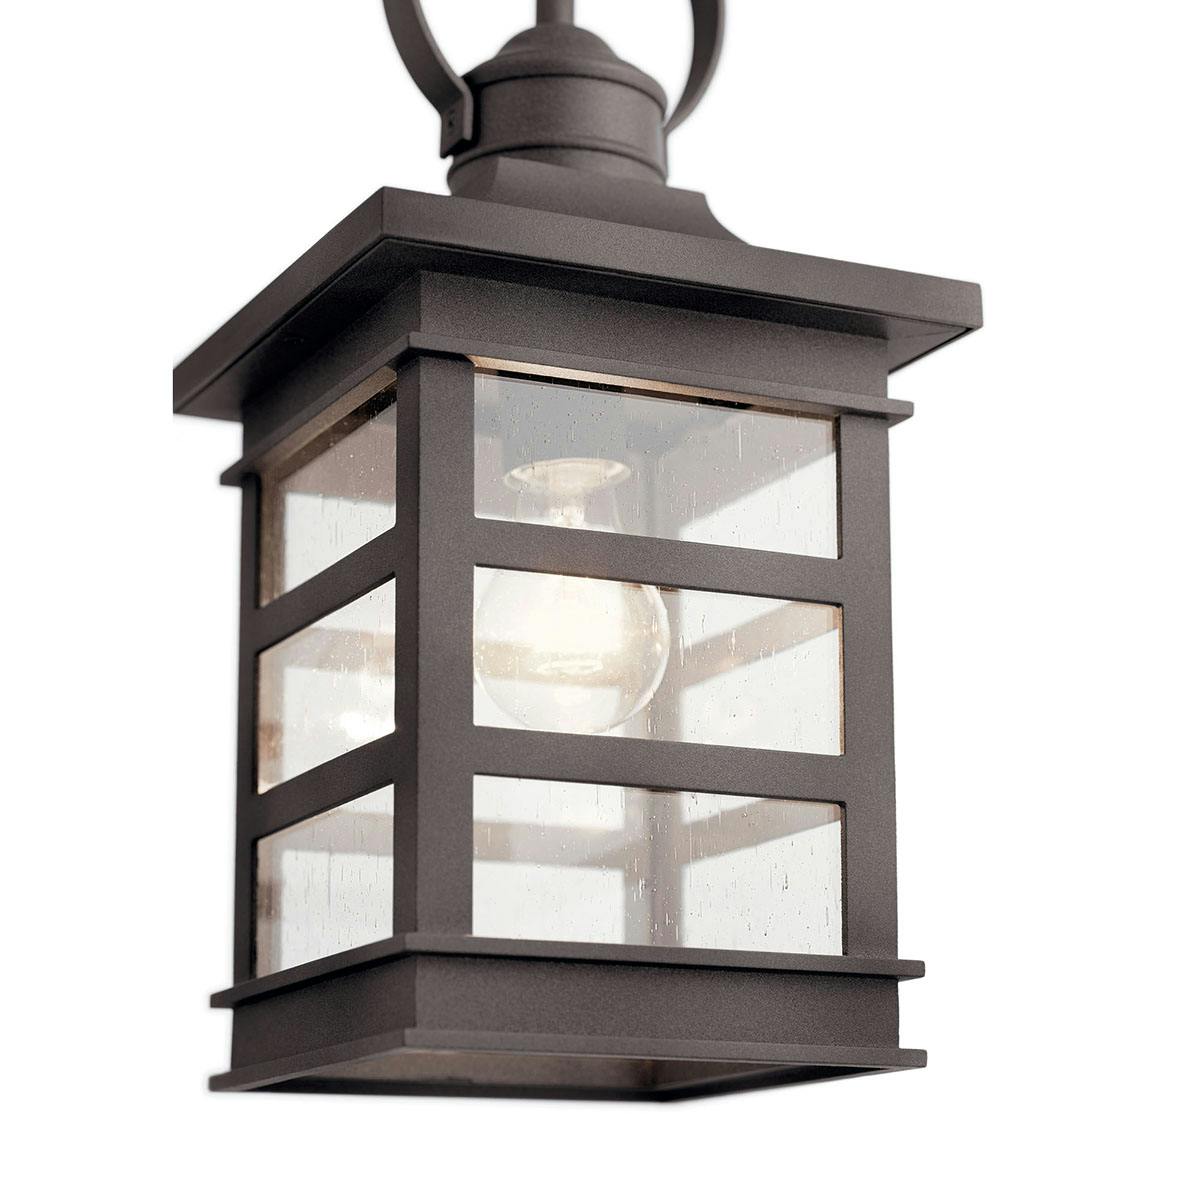 Close up view of the Grand Ridge 16.875" 1 Light Pendant Zinc on a white background